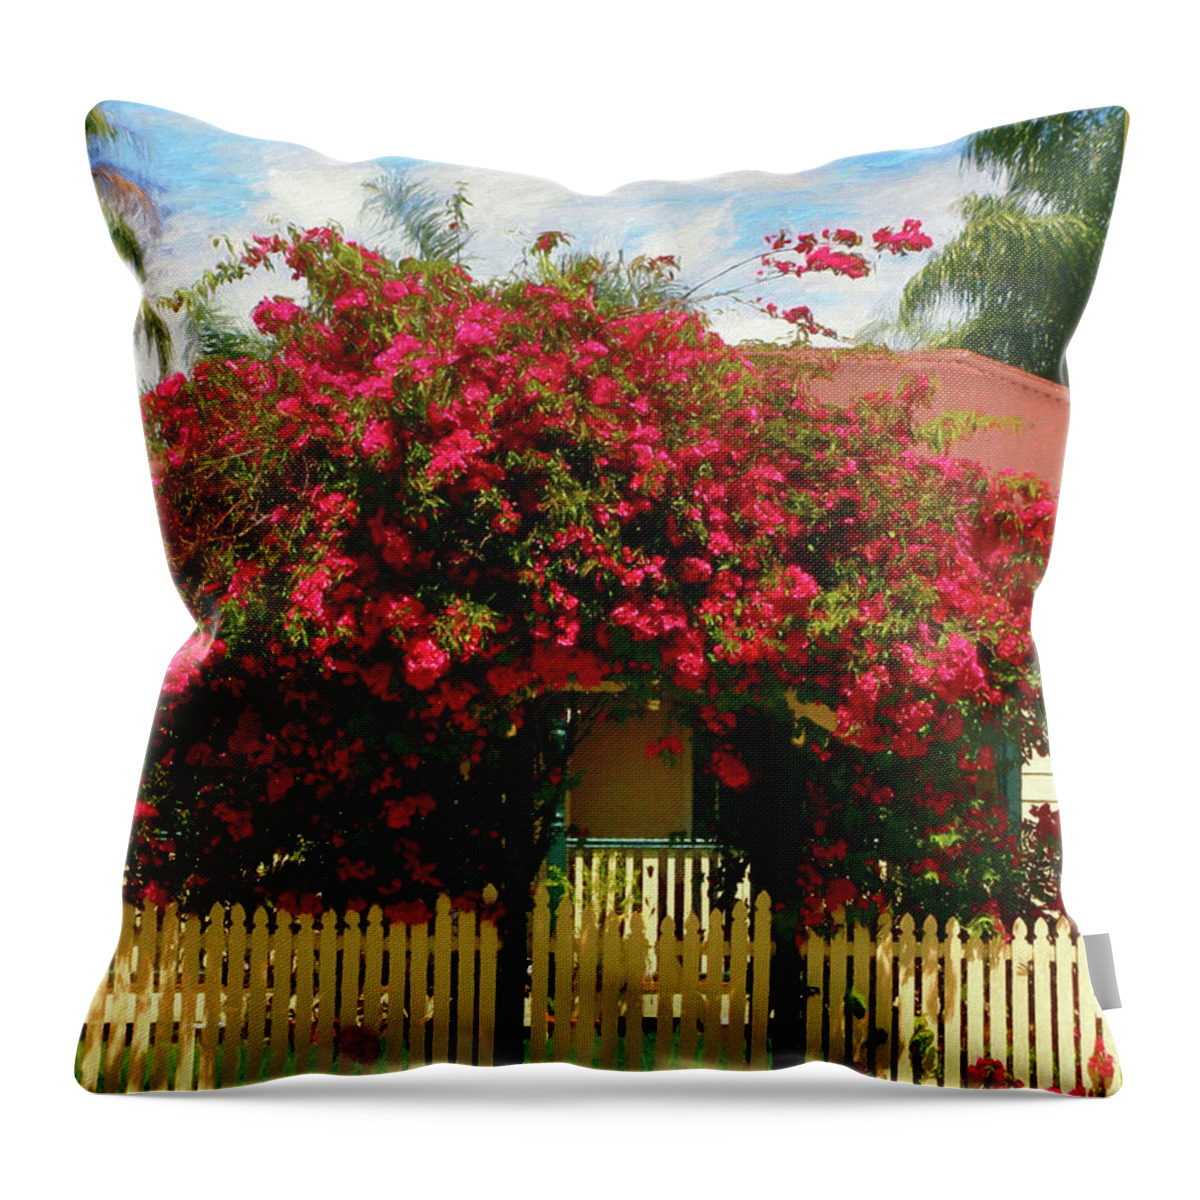 Photography Throw Pillow featuring the photograph Bougainvillea Cottage by Kaye Menner by Kaye Menner